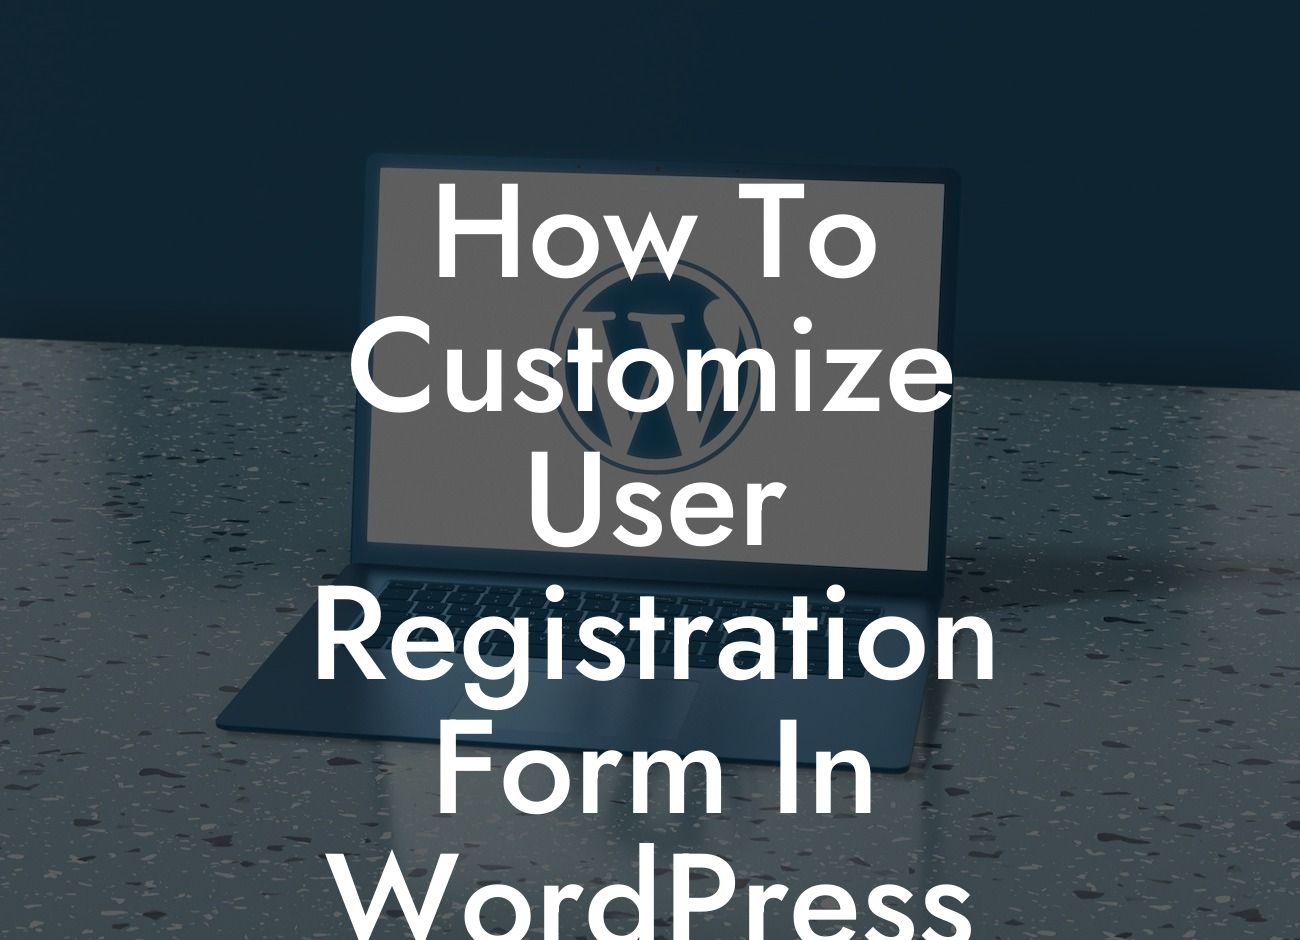 How To Customize User Registration Form In WordPress